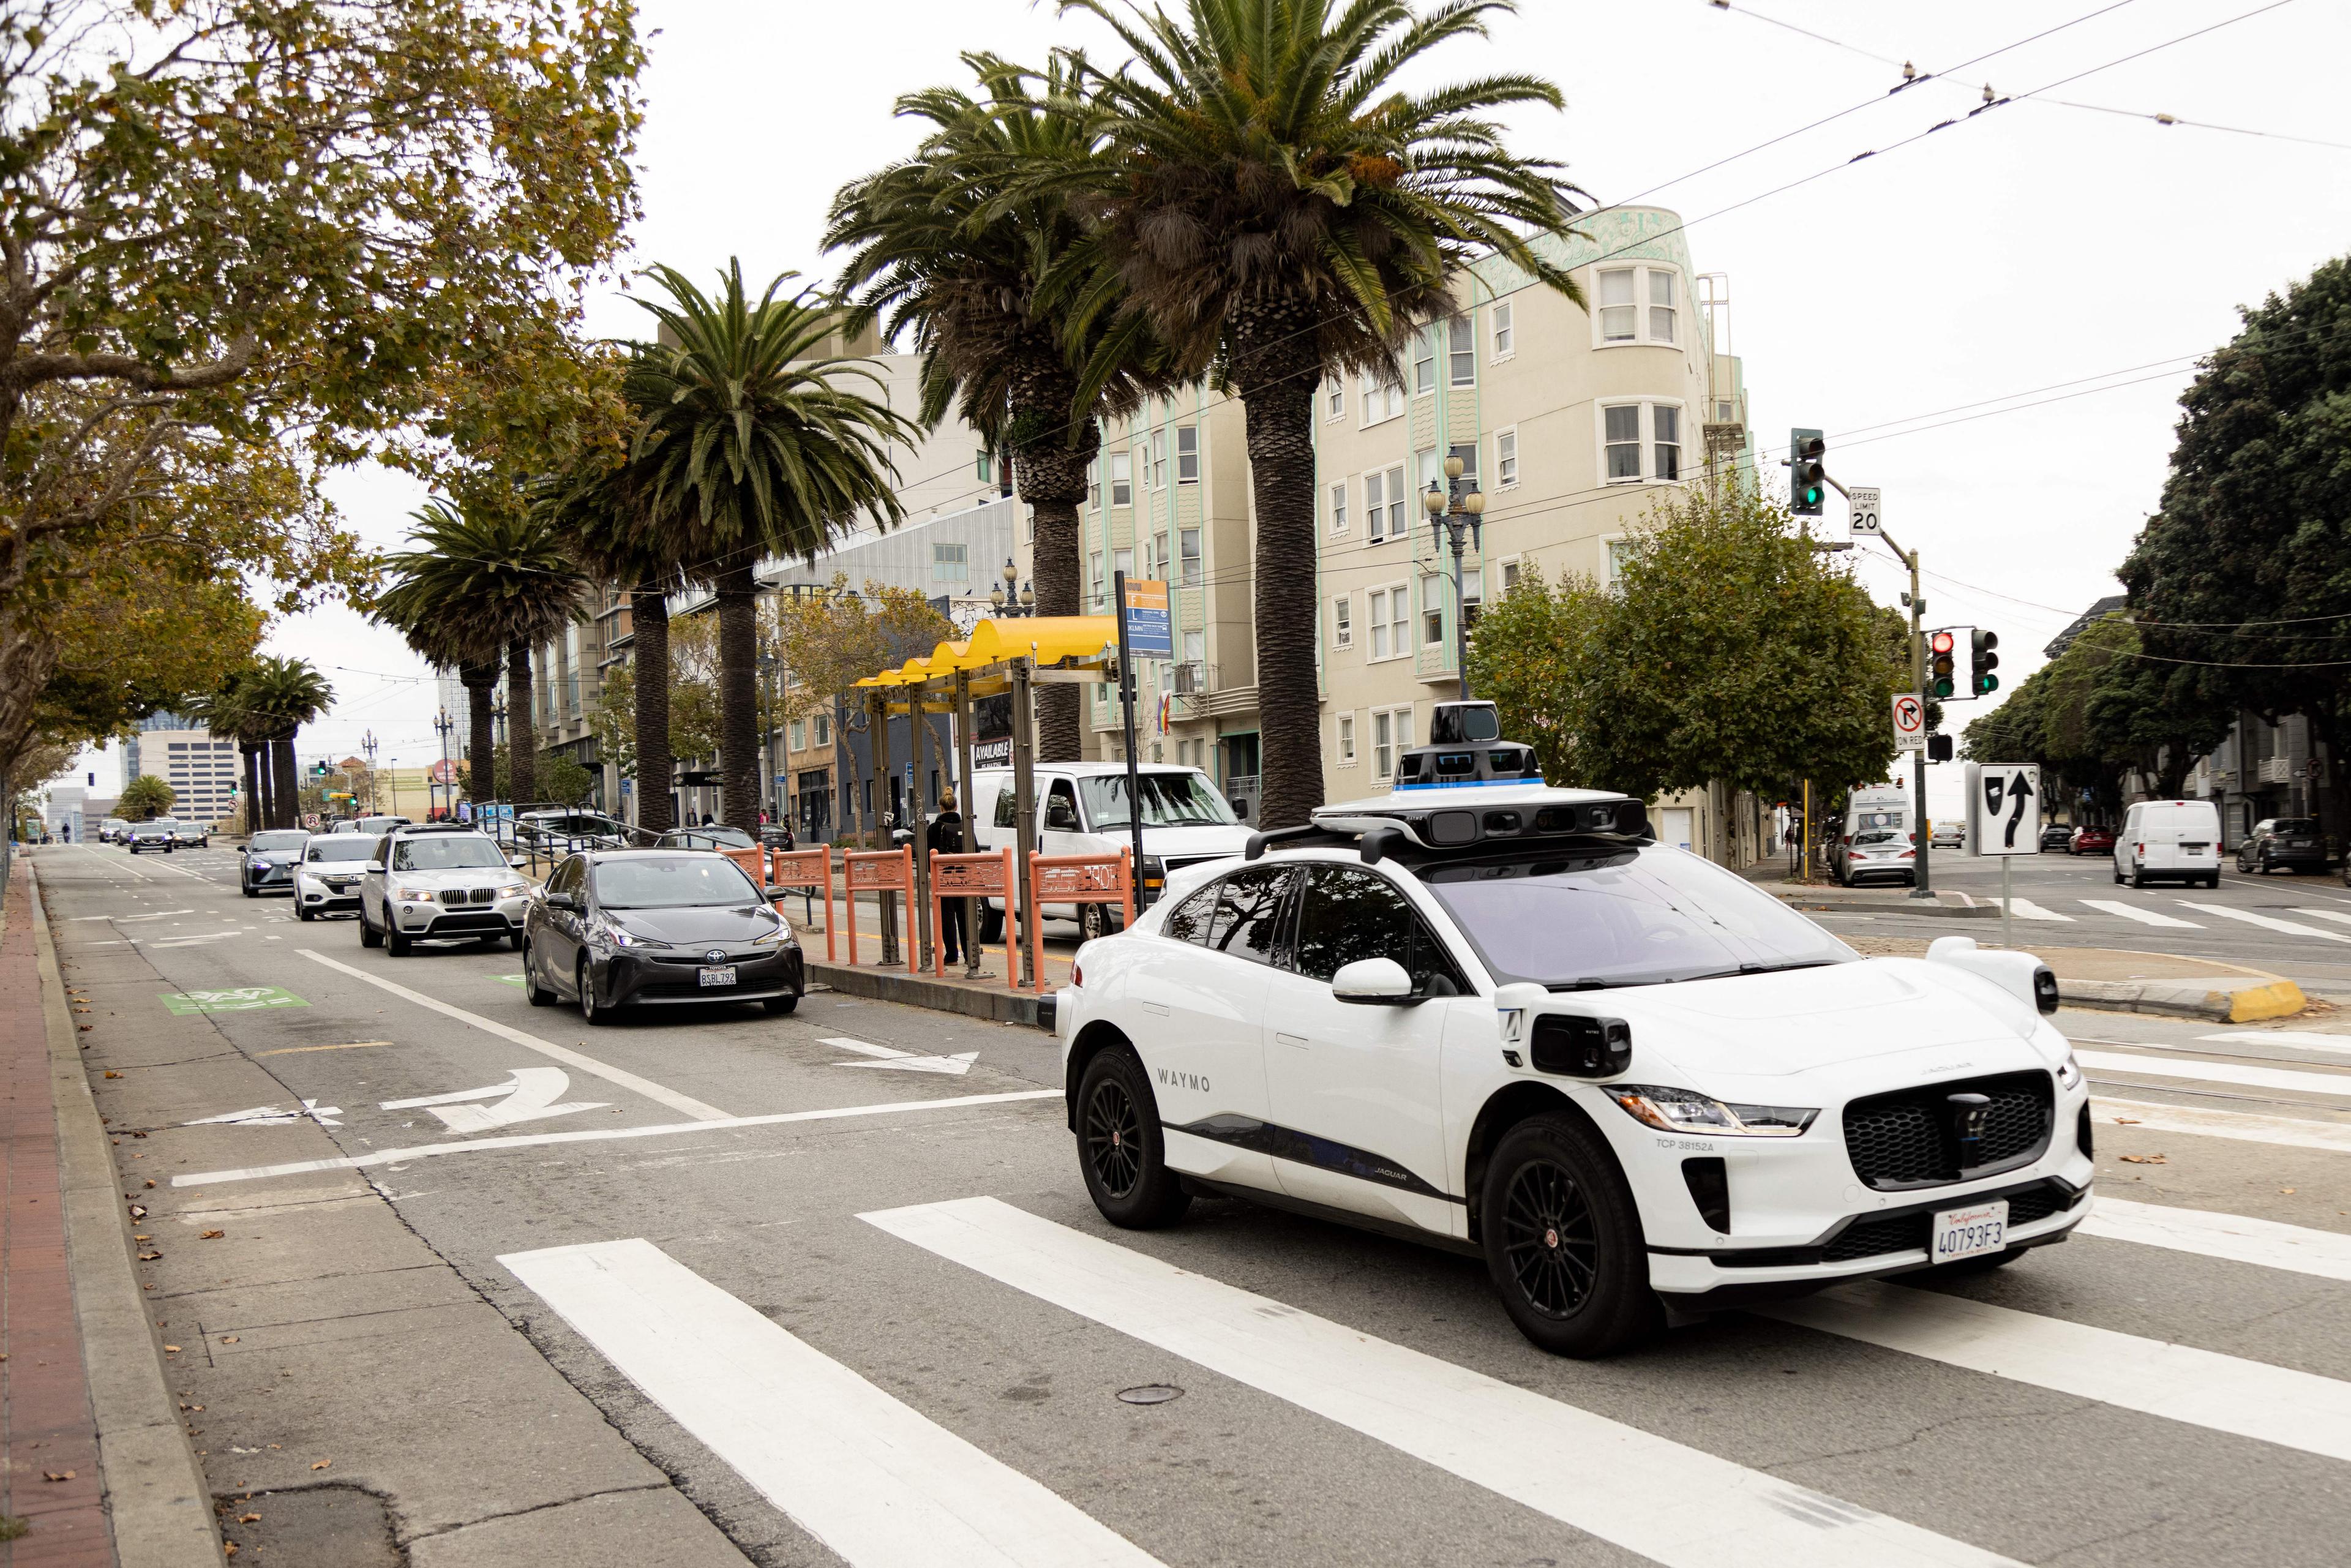 California Bill Allowing Local Regulation of Driverless Cars Is Amended, Then Shelved